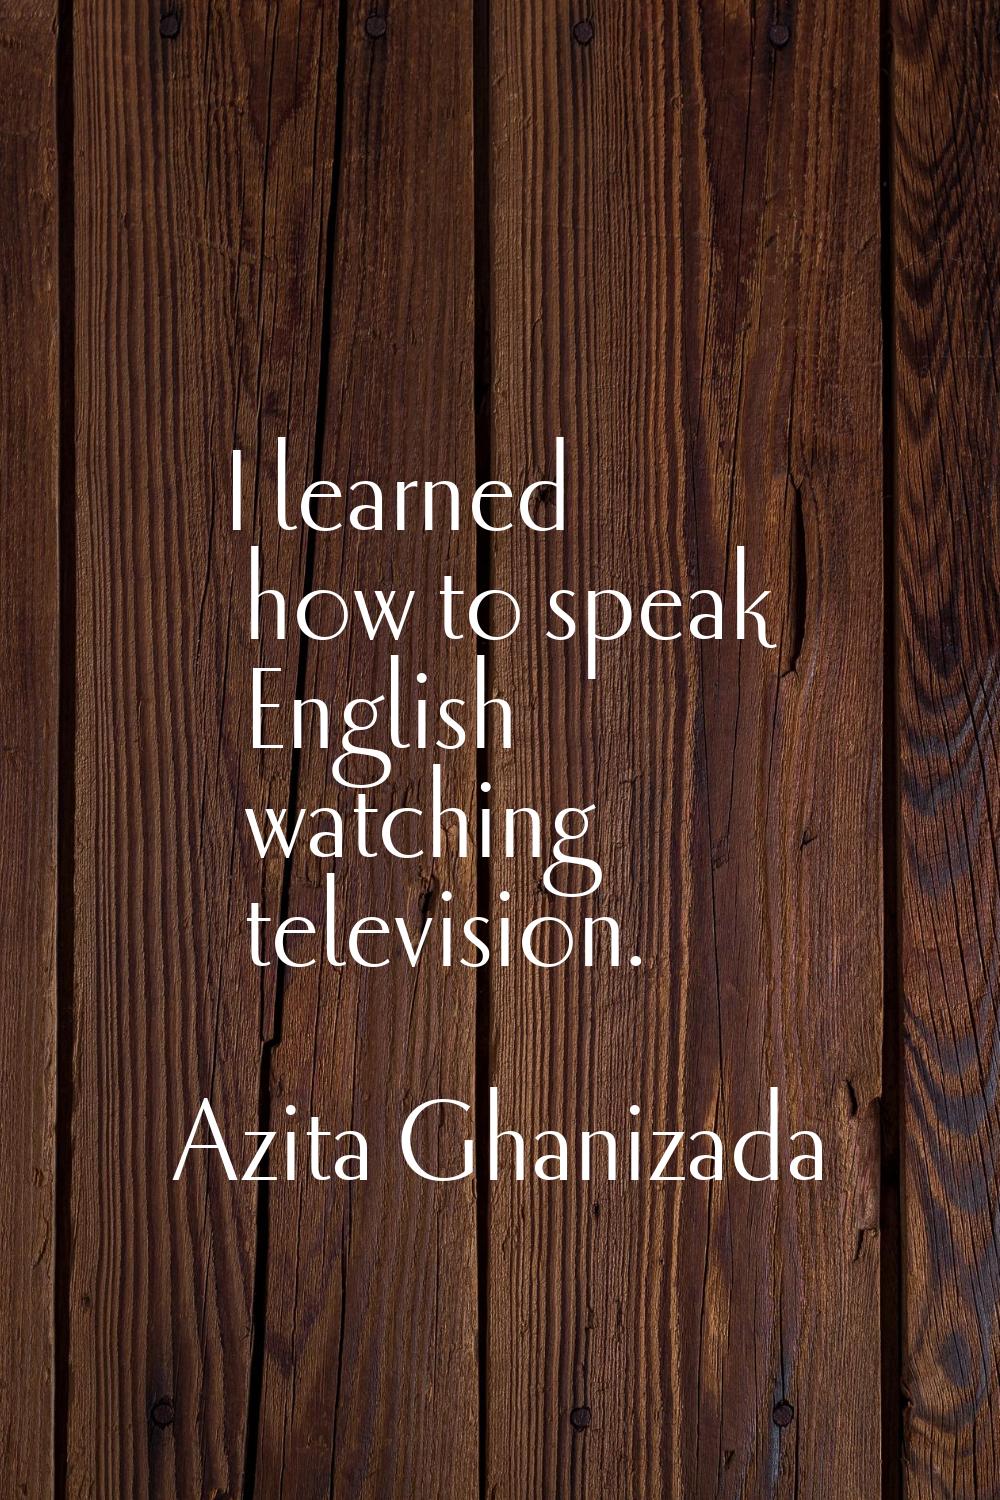 I learned how to speak English watching television.